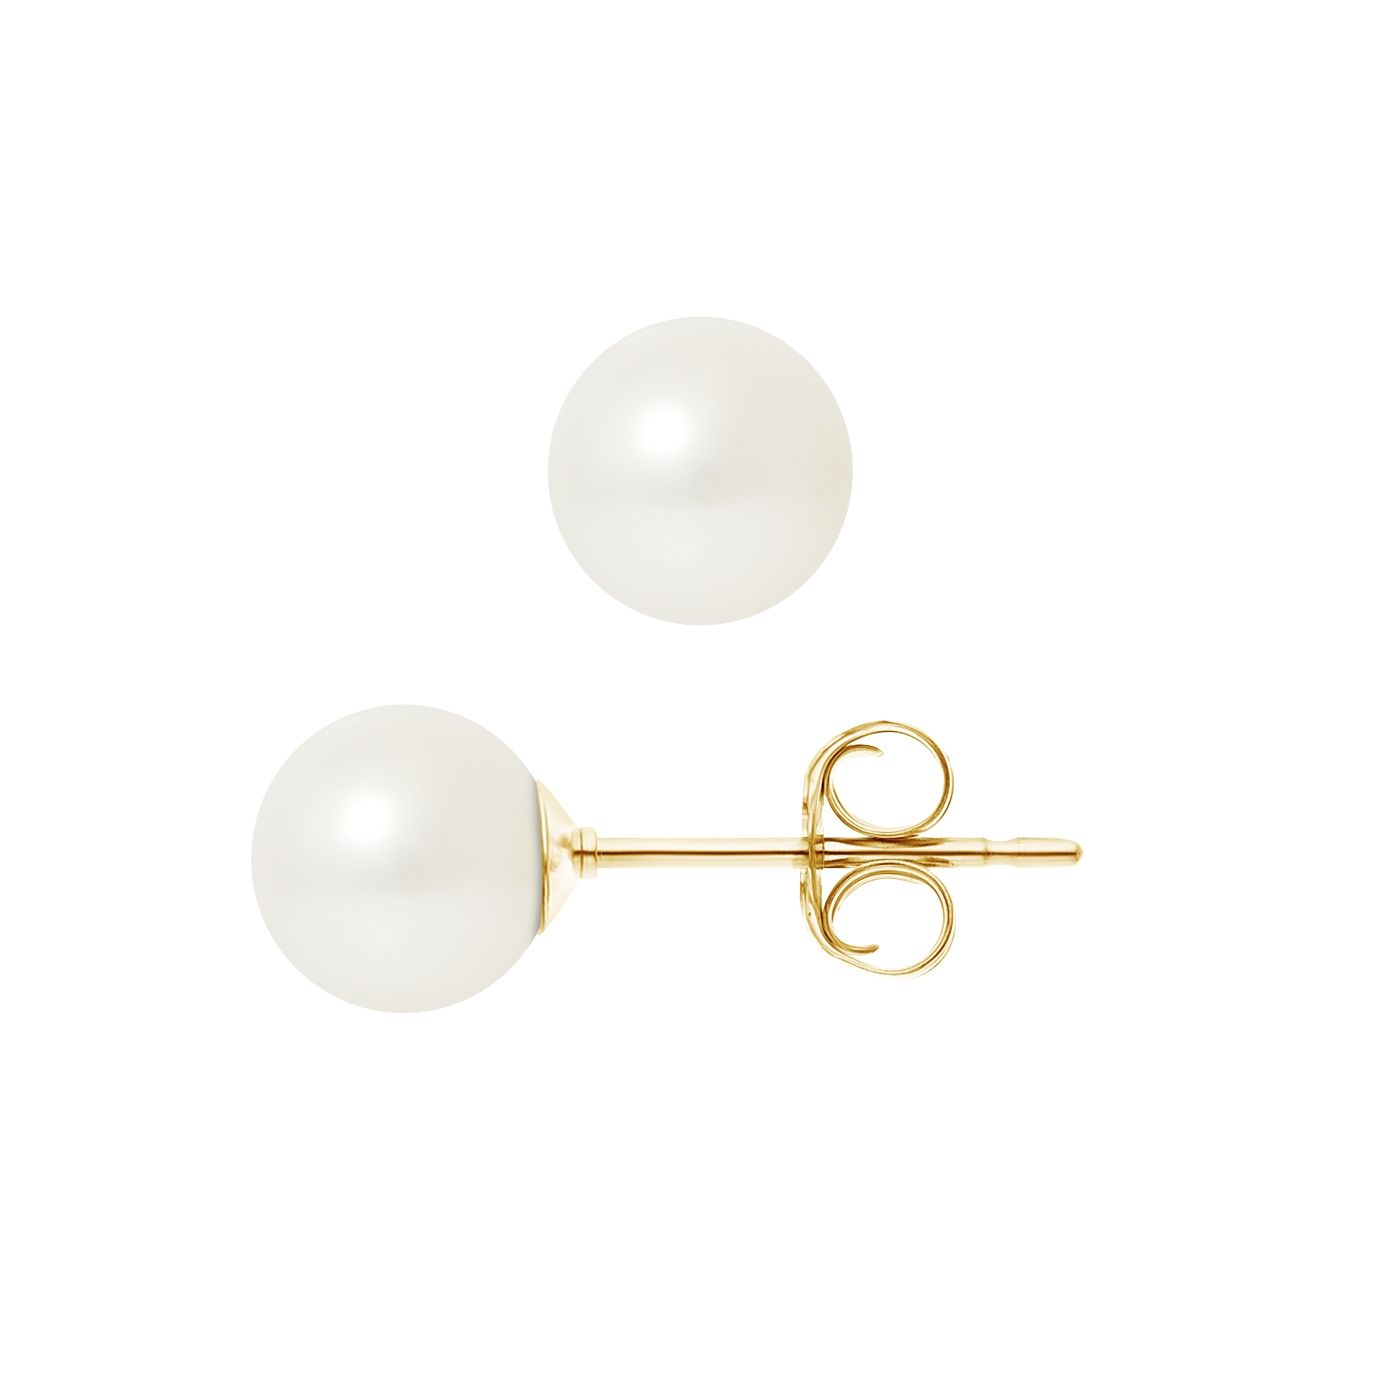 7.5 mm White Freshwater Pearls Earrings and yellow gold 750/1000 Made in France Beautiful pair of white Freshwater pearls earrings of 7.5 mm. Mount Solid gold yellow 750/1000-18K. Shape: Round Diameter: 7.5 mm Luster: Excellent Quality: AA Yellow Gold 750/1000 Weight of gold: 0,30 gr